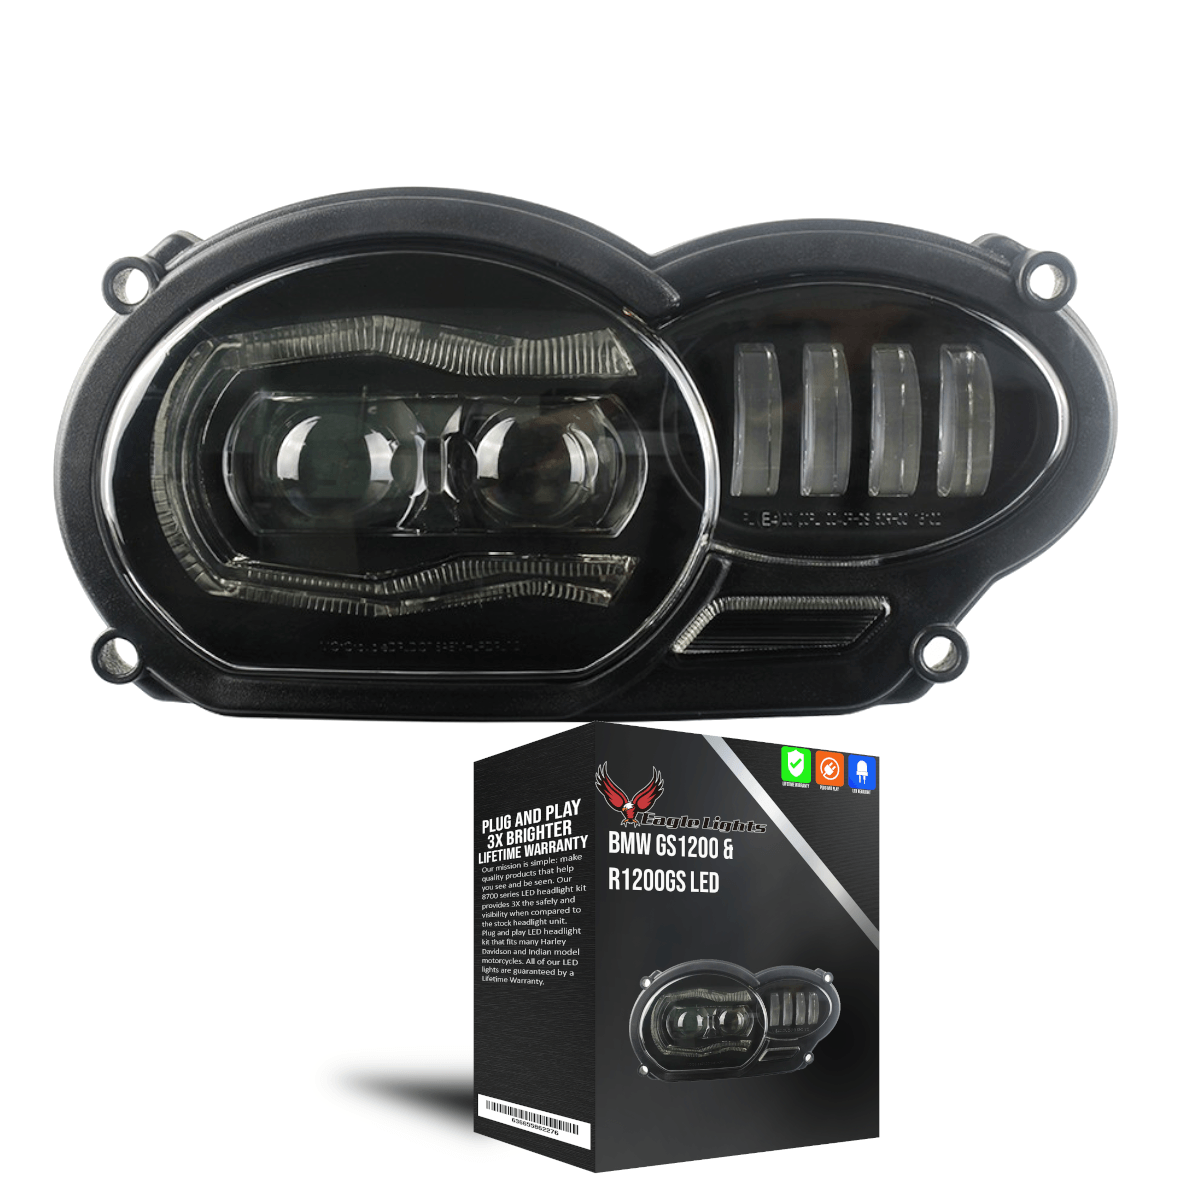 Eagle Lights LED Headlight Kit with Halo Ring for 2006 - 2012 BMW R1200GS